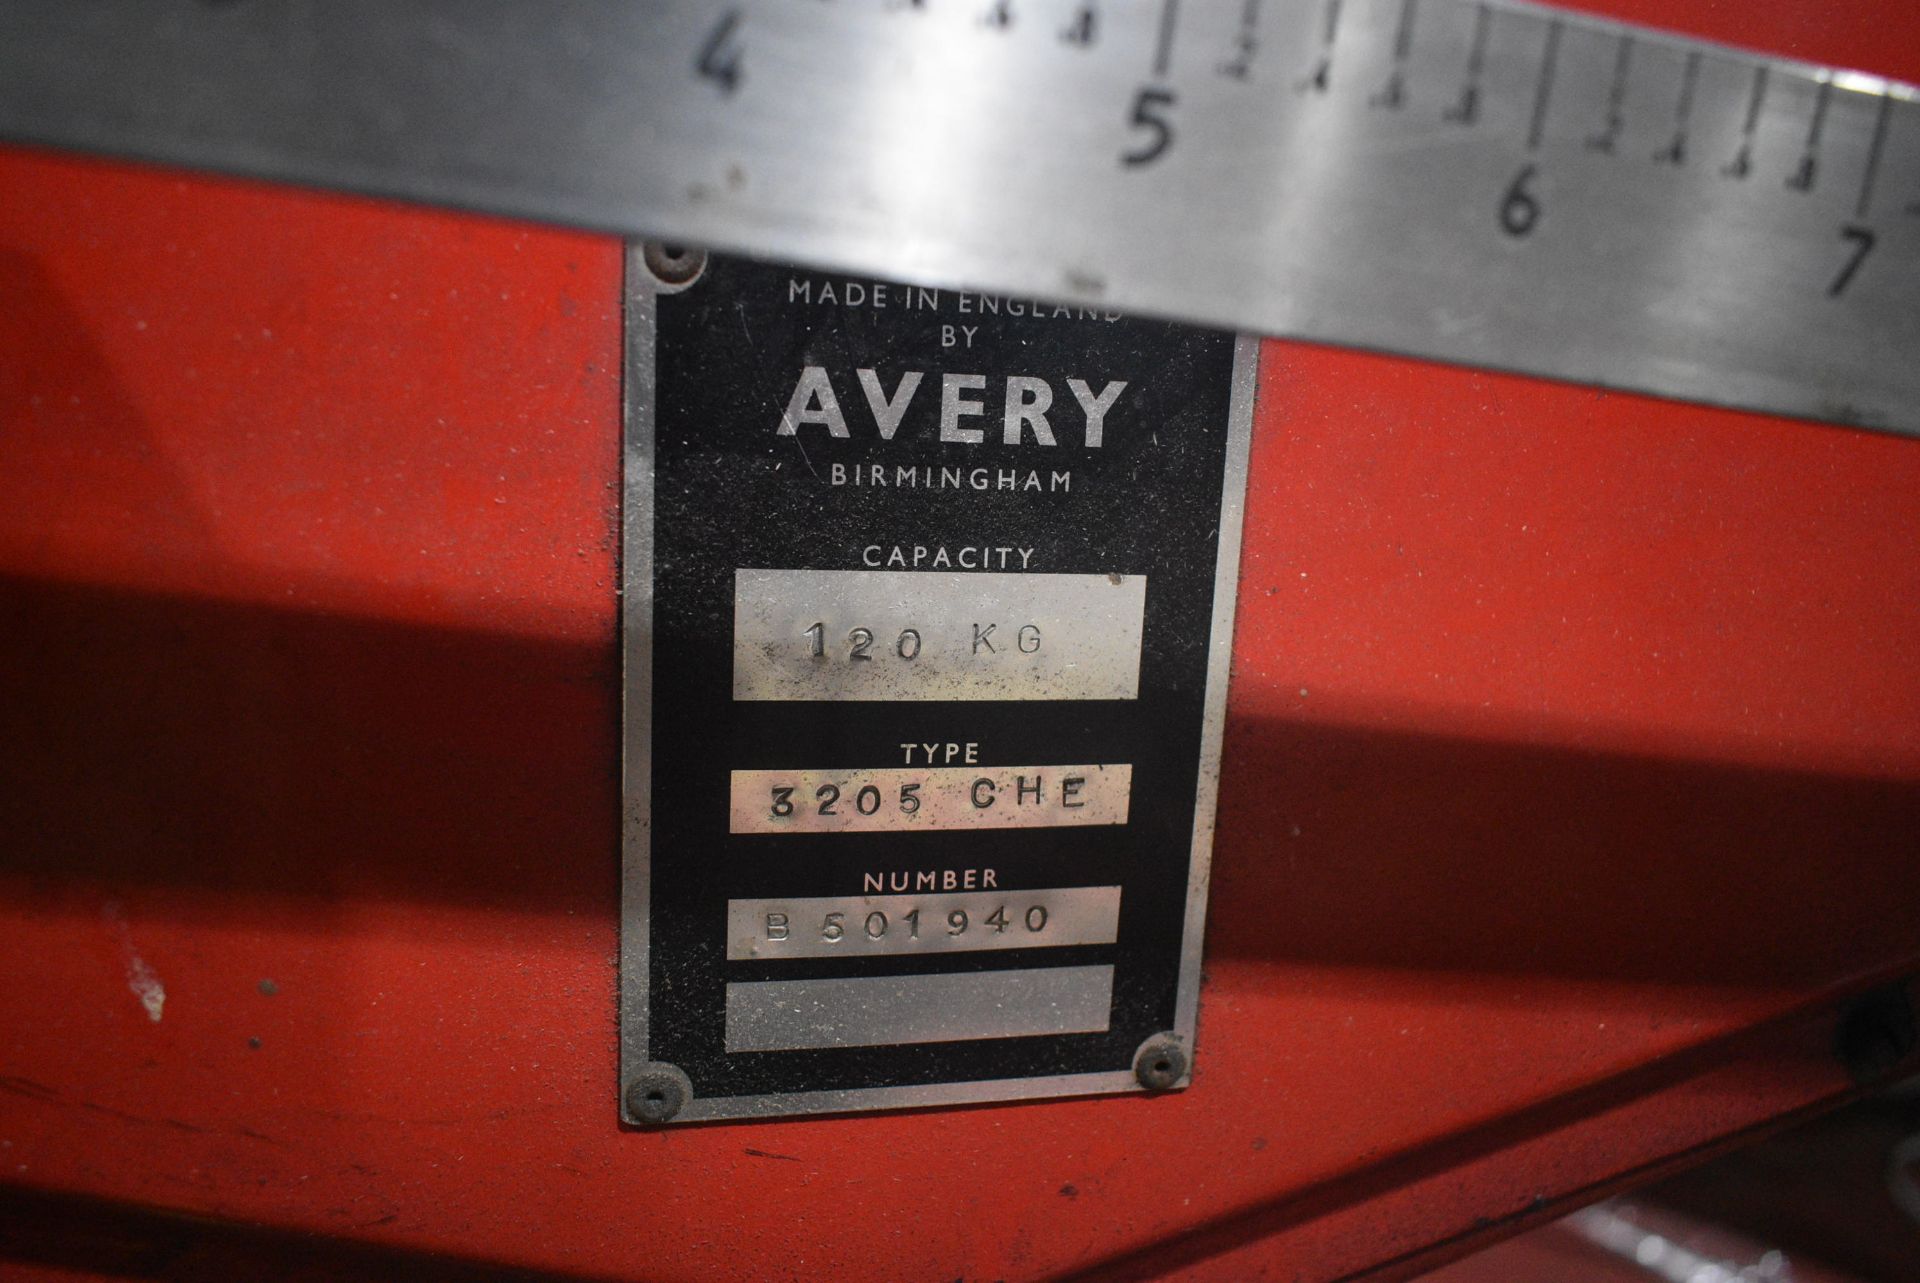 Avery 3205 CHE 120kg Dial Indicating Portable Platform Weighing Machine, serial no. B501940 (free - Image 2 of 2